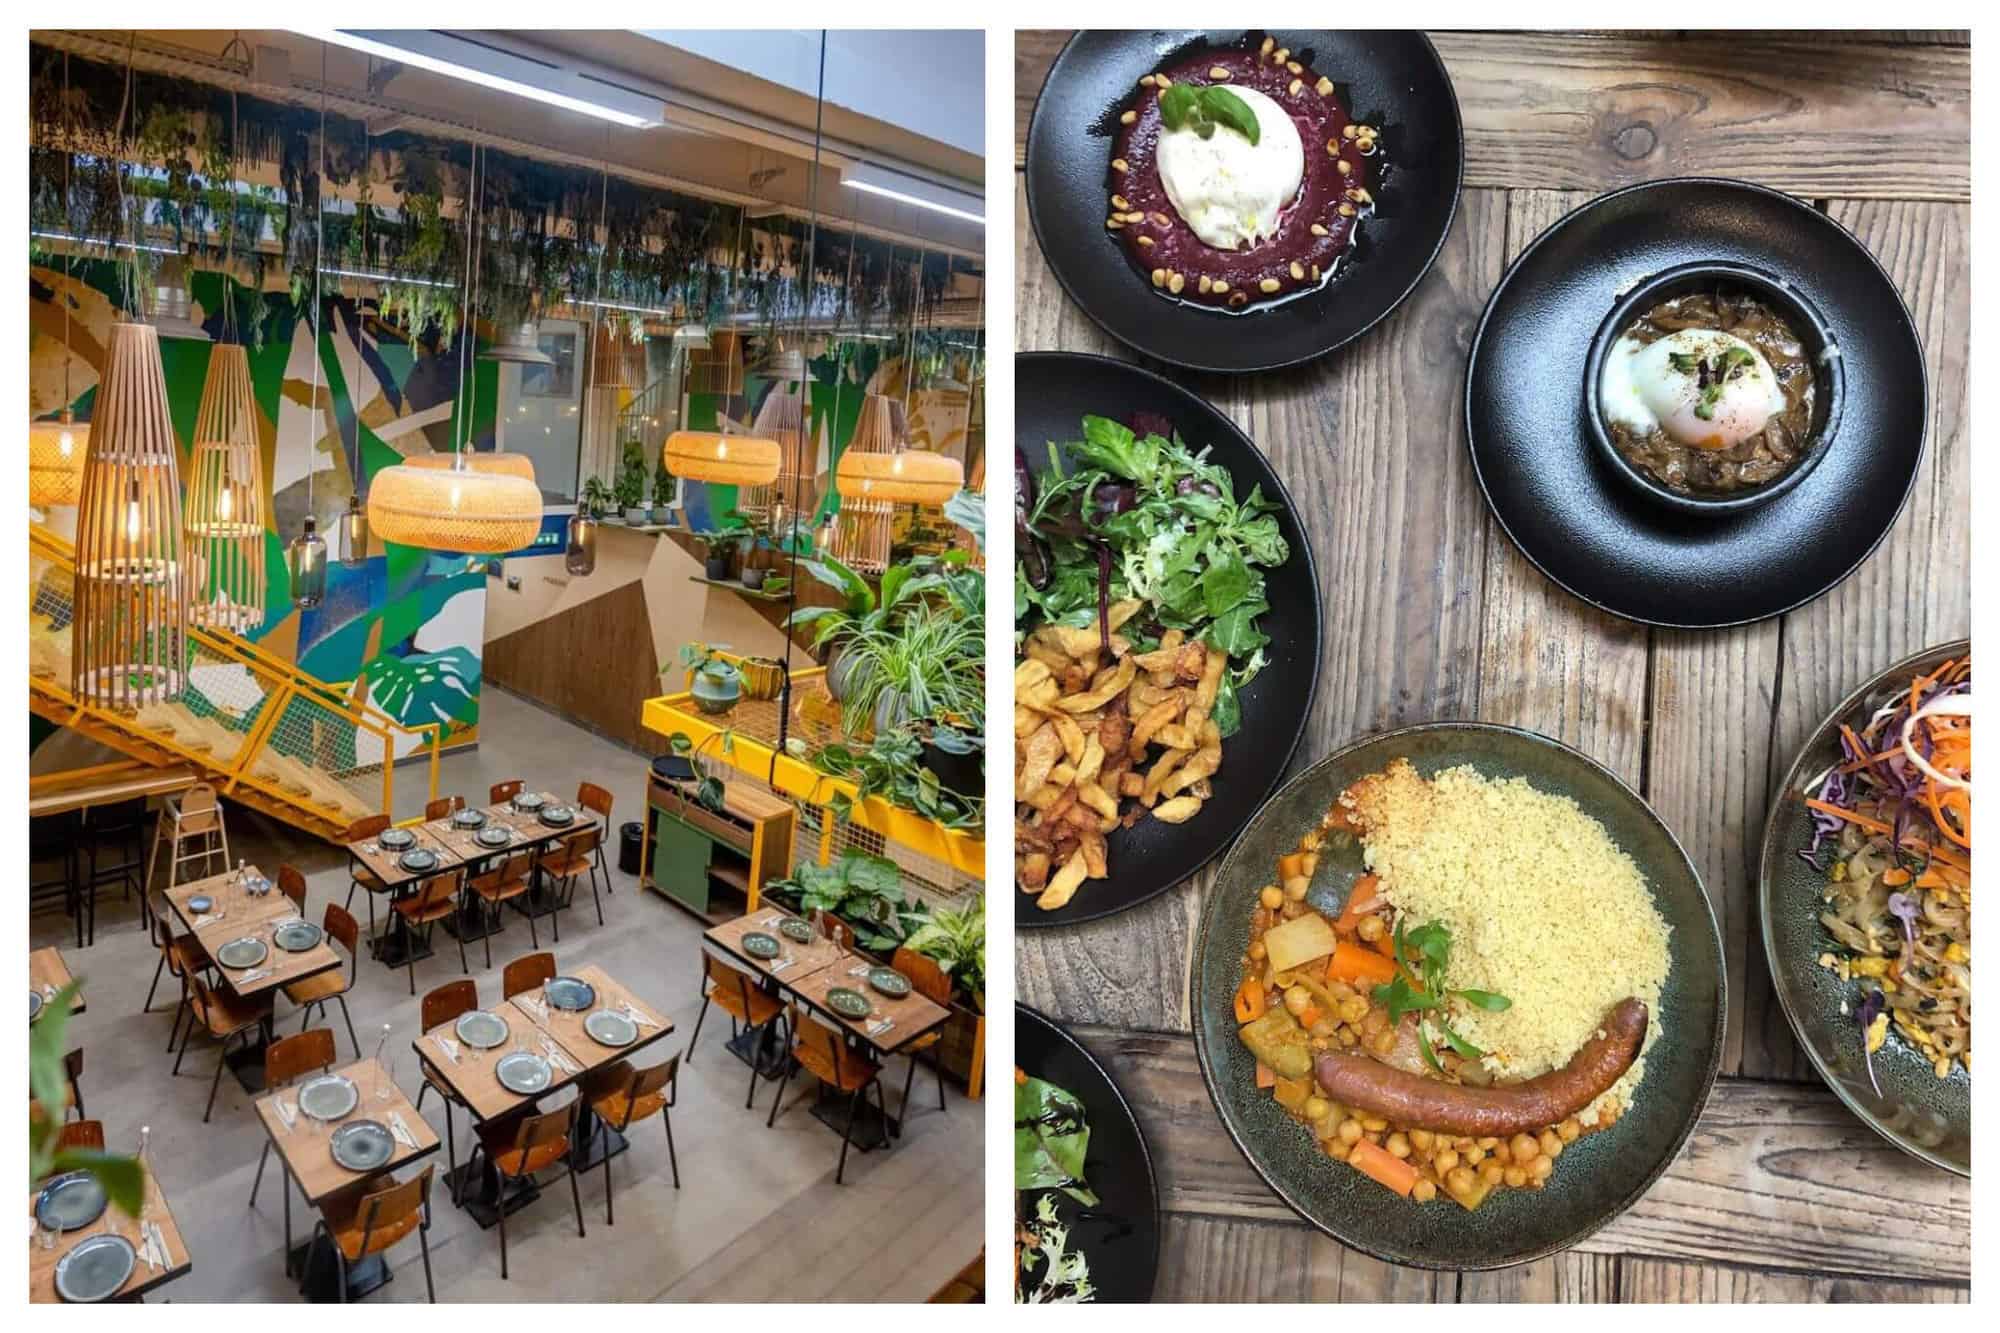 The modern and brightly coloured cafeteria of Arkose Nation with plants and plant murals surrounding wooden tables ready for service. Several plates of food at Arkose Nation, including sausage and couscous and poached egg and mushrooms.